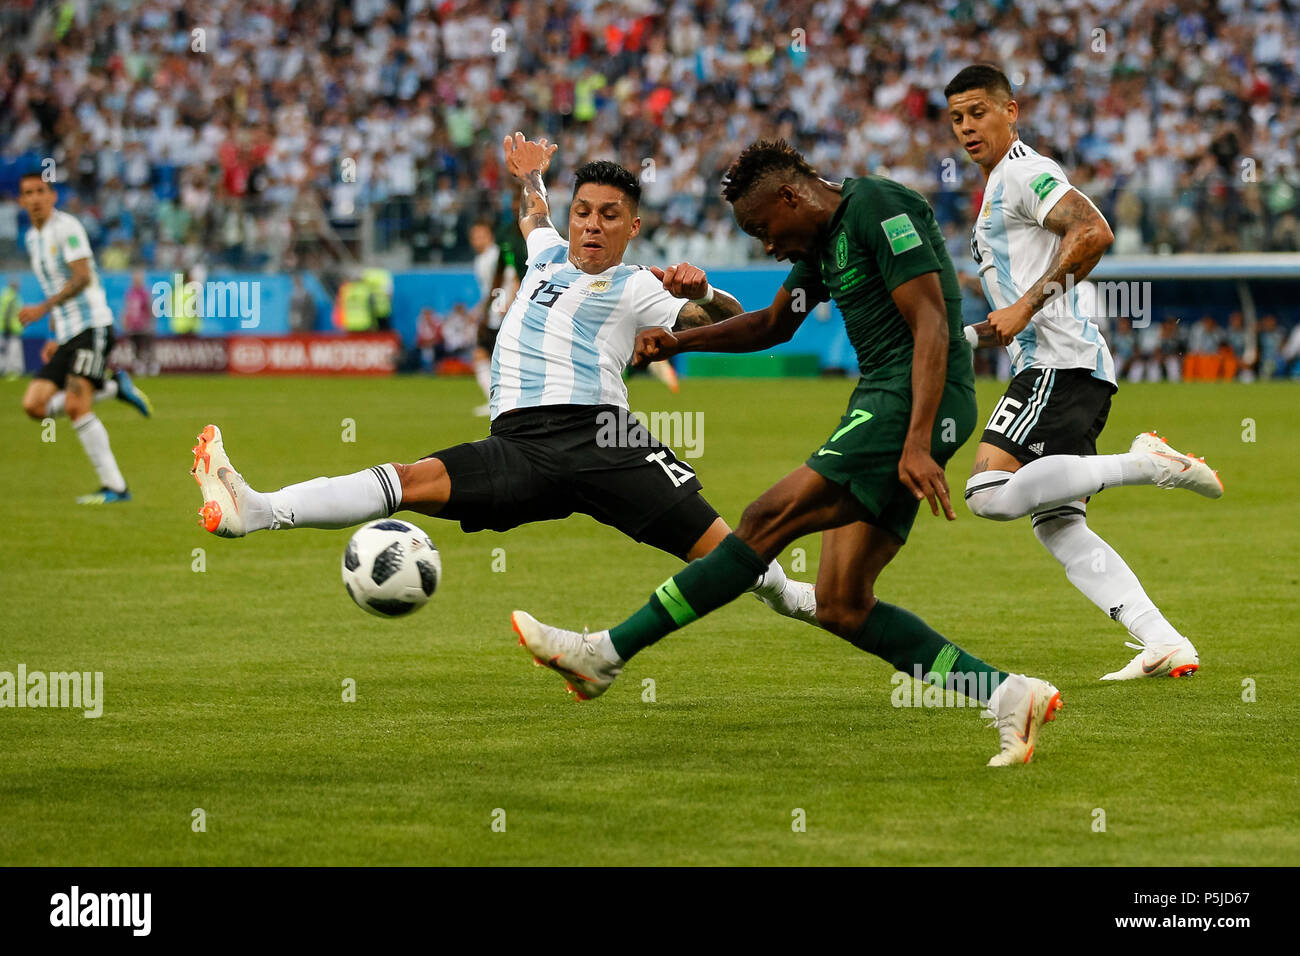 St Petersburg, Russia, 27 June 2018. Enzo Perez of Argentina and Ahmed Musa of Nigeria during the 2018 FIFA World Cup Group D match between Nigeria and Argentina at Saint Petersburg Stadium on June 26th 2018 in Saint Petersburg, Russia. (Photo by Daniel Chesterton/phcimages.com) Credit: PHC Images/Alamy Live News Stock Photo